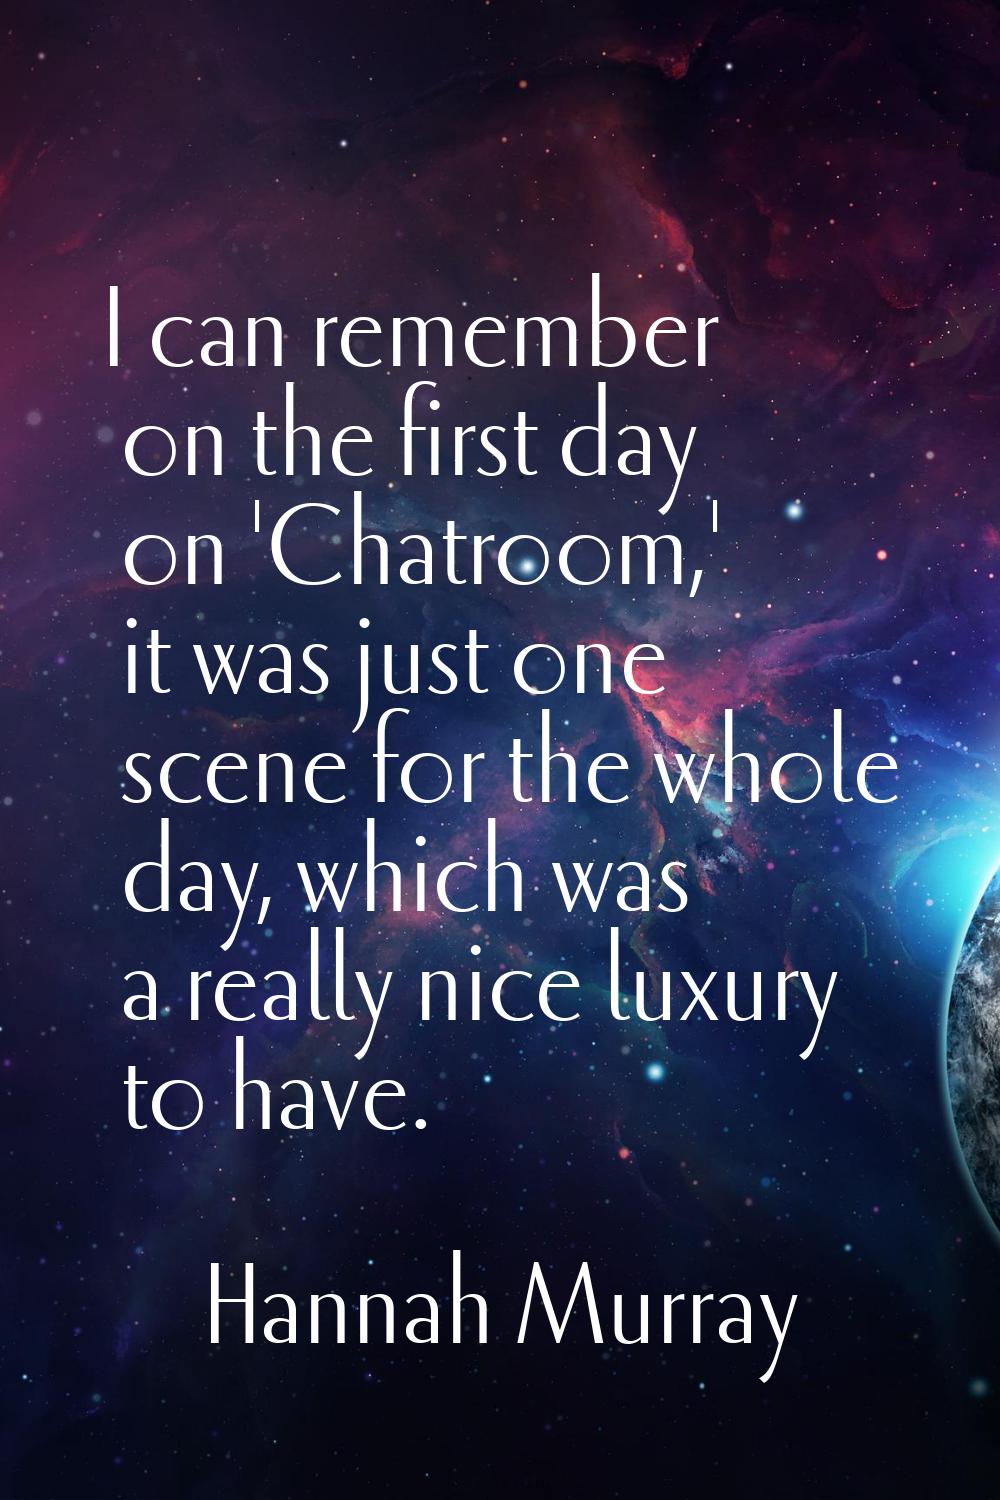 I can remember on the first day on 'Chatroom,' it was just one scene for the whole day, which was a